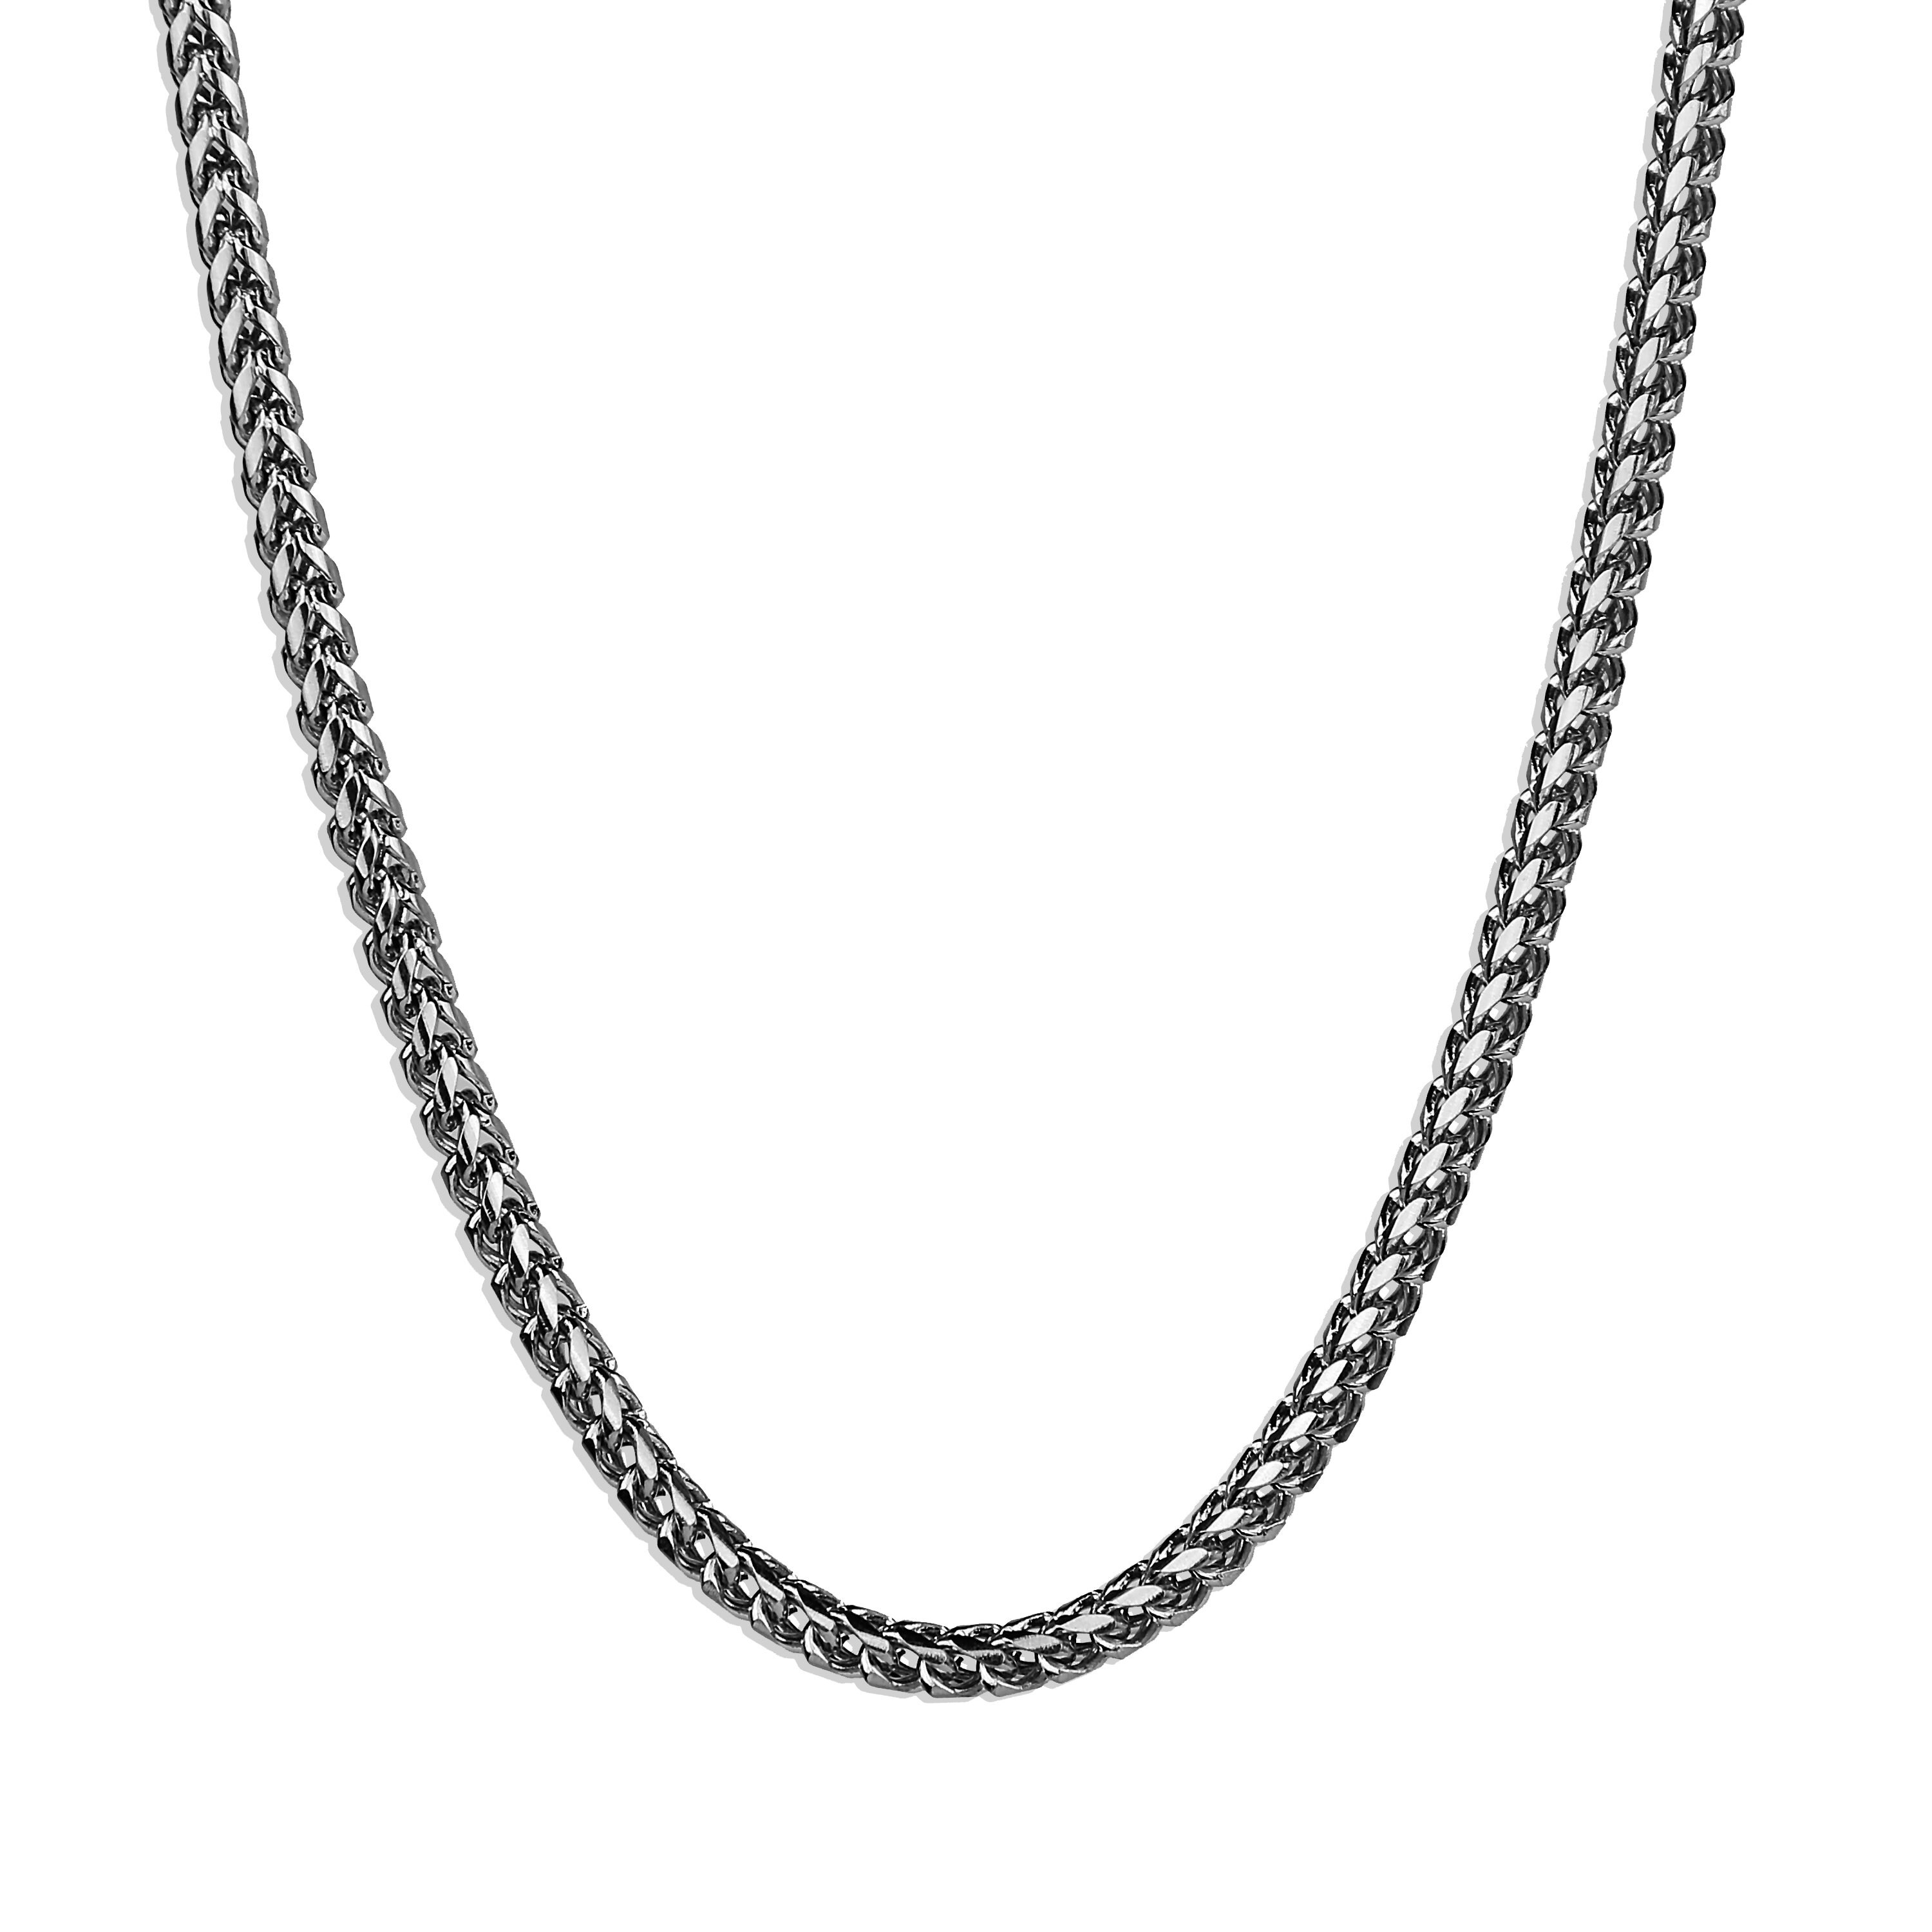 Men's Stainless Steel Chain Necklace Ultra Thick and Wide (Silver,13.5 –